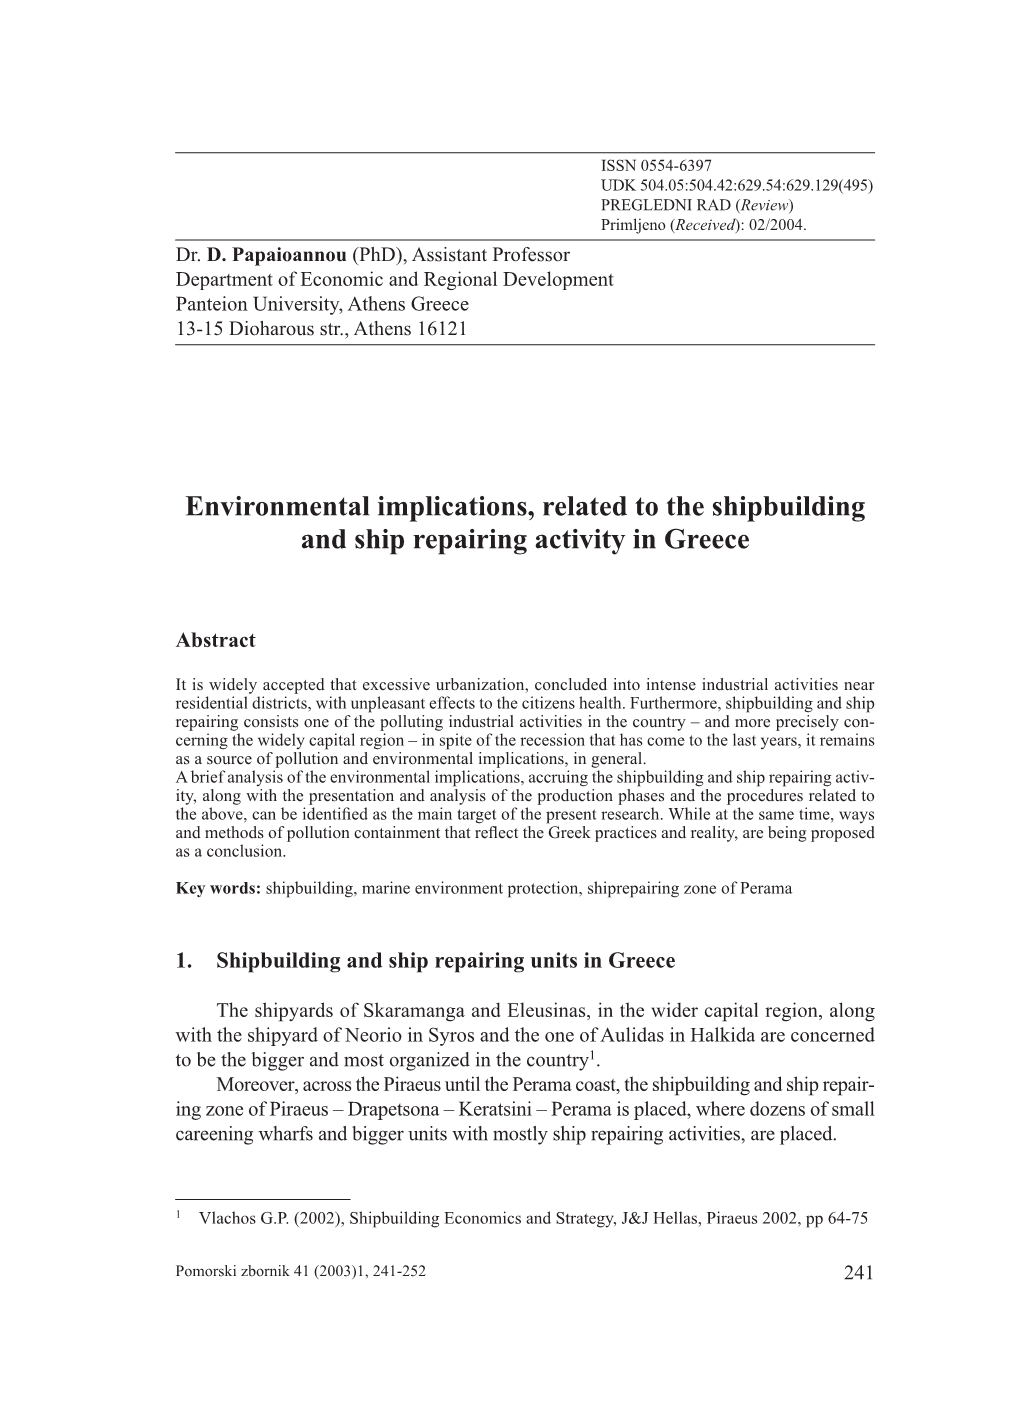 Environmental Implications, Related to the Shipbuilding and Ship Repairing Activity in Greece